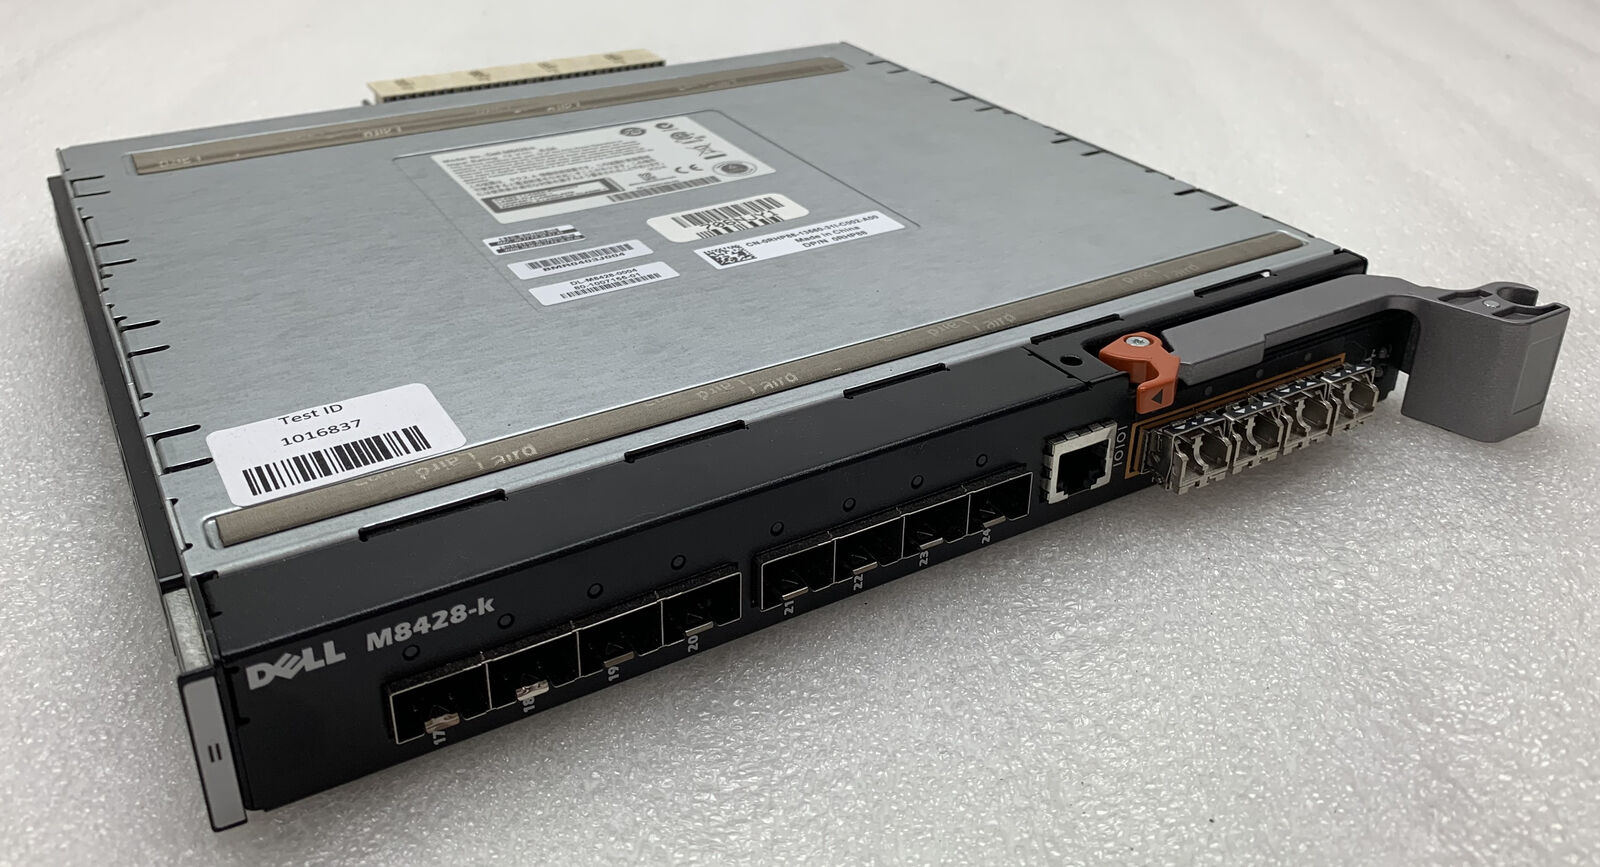 Dell 10GBE M8428-K Blade Switch For PowerEdge M1000E Blade Server Module